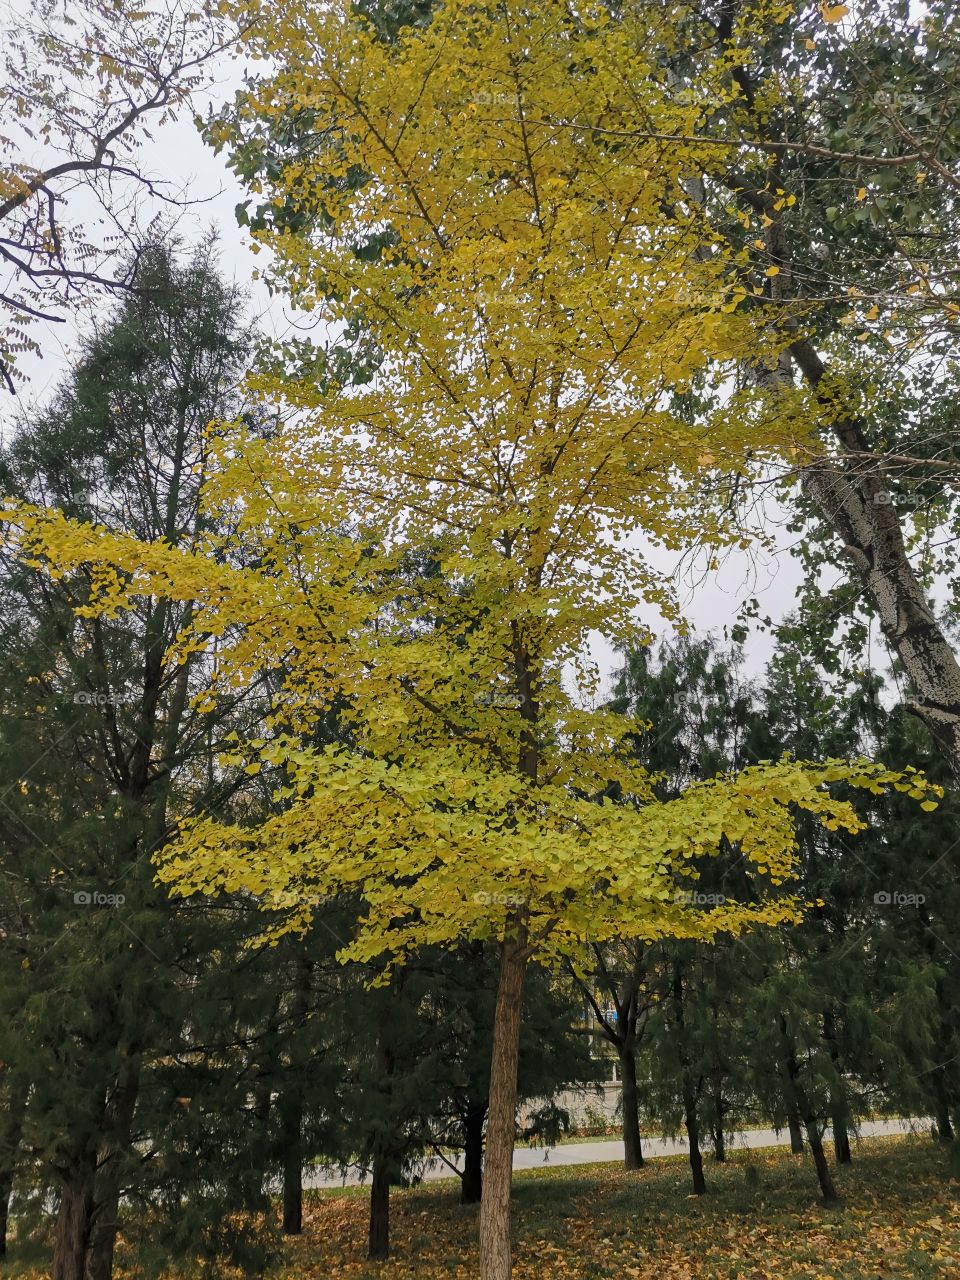 The unique yellow tree in the park